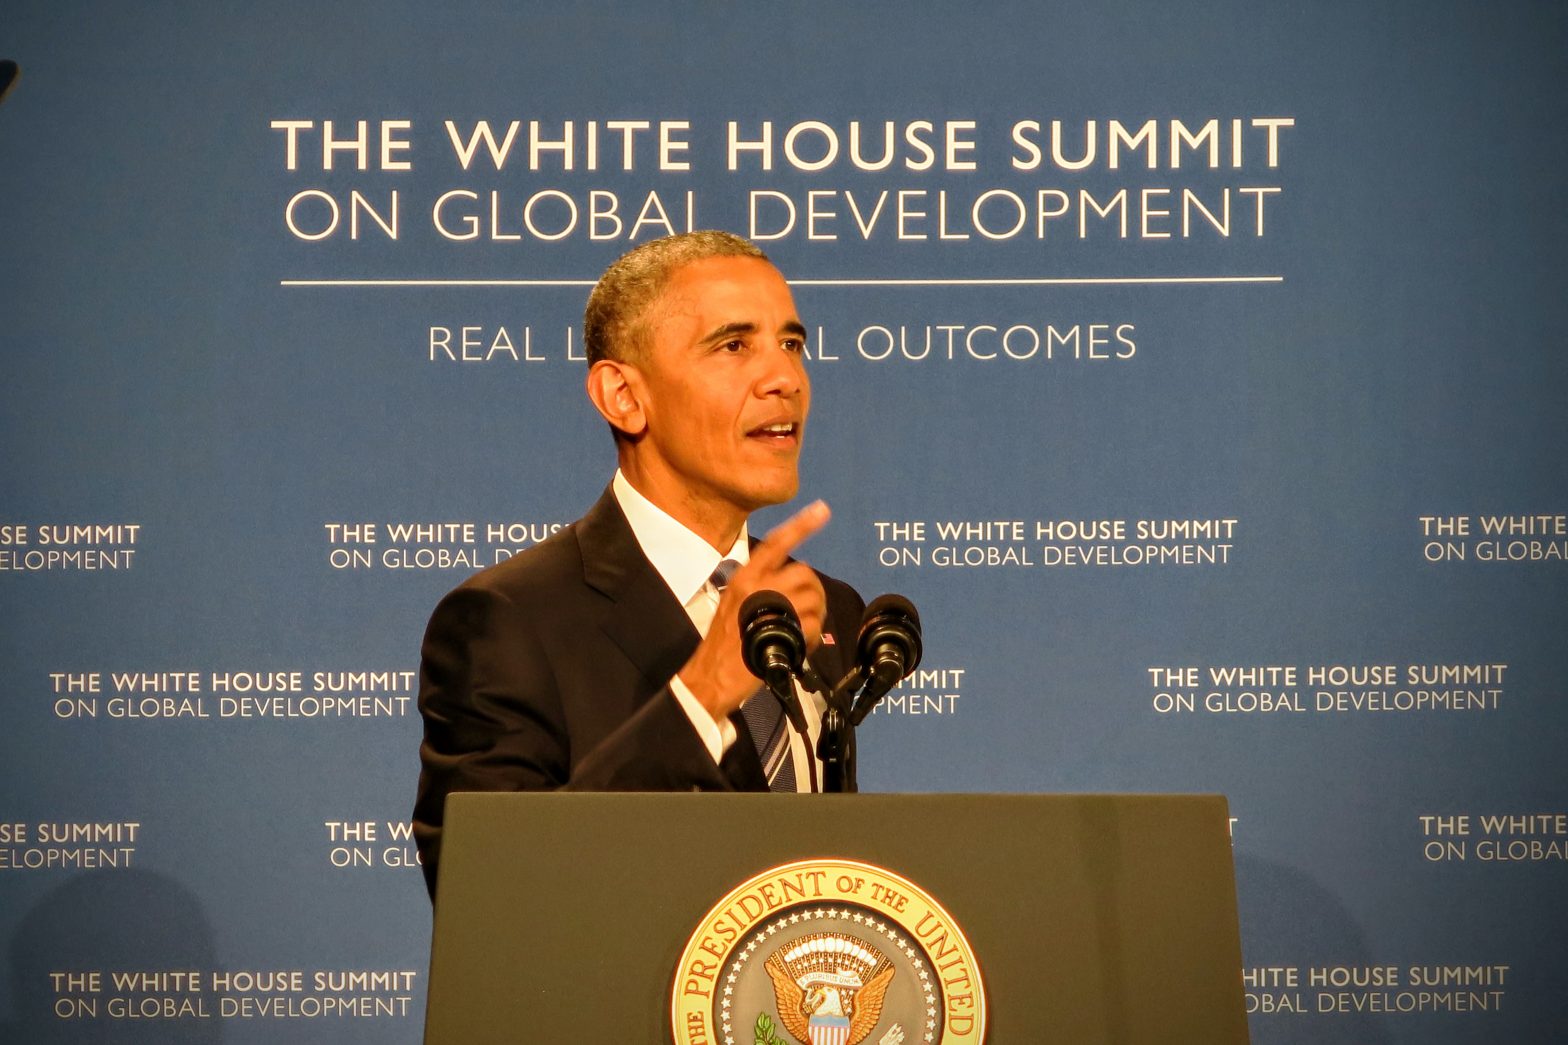 The White House Summit on Global Development: Celebration, Legacy, and Looking Forward